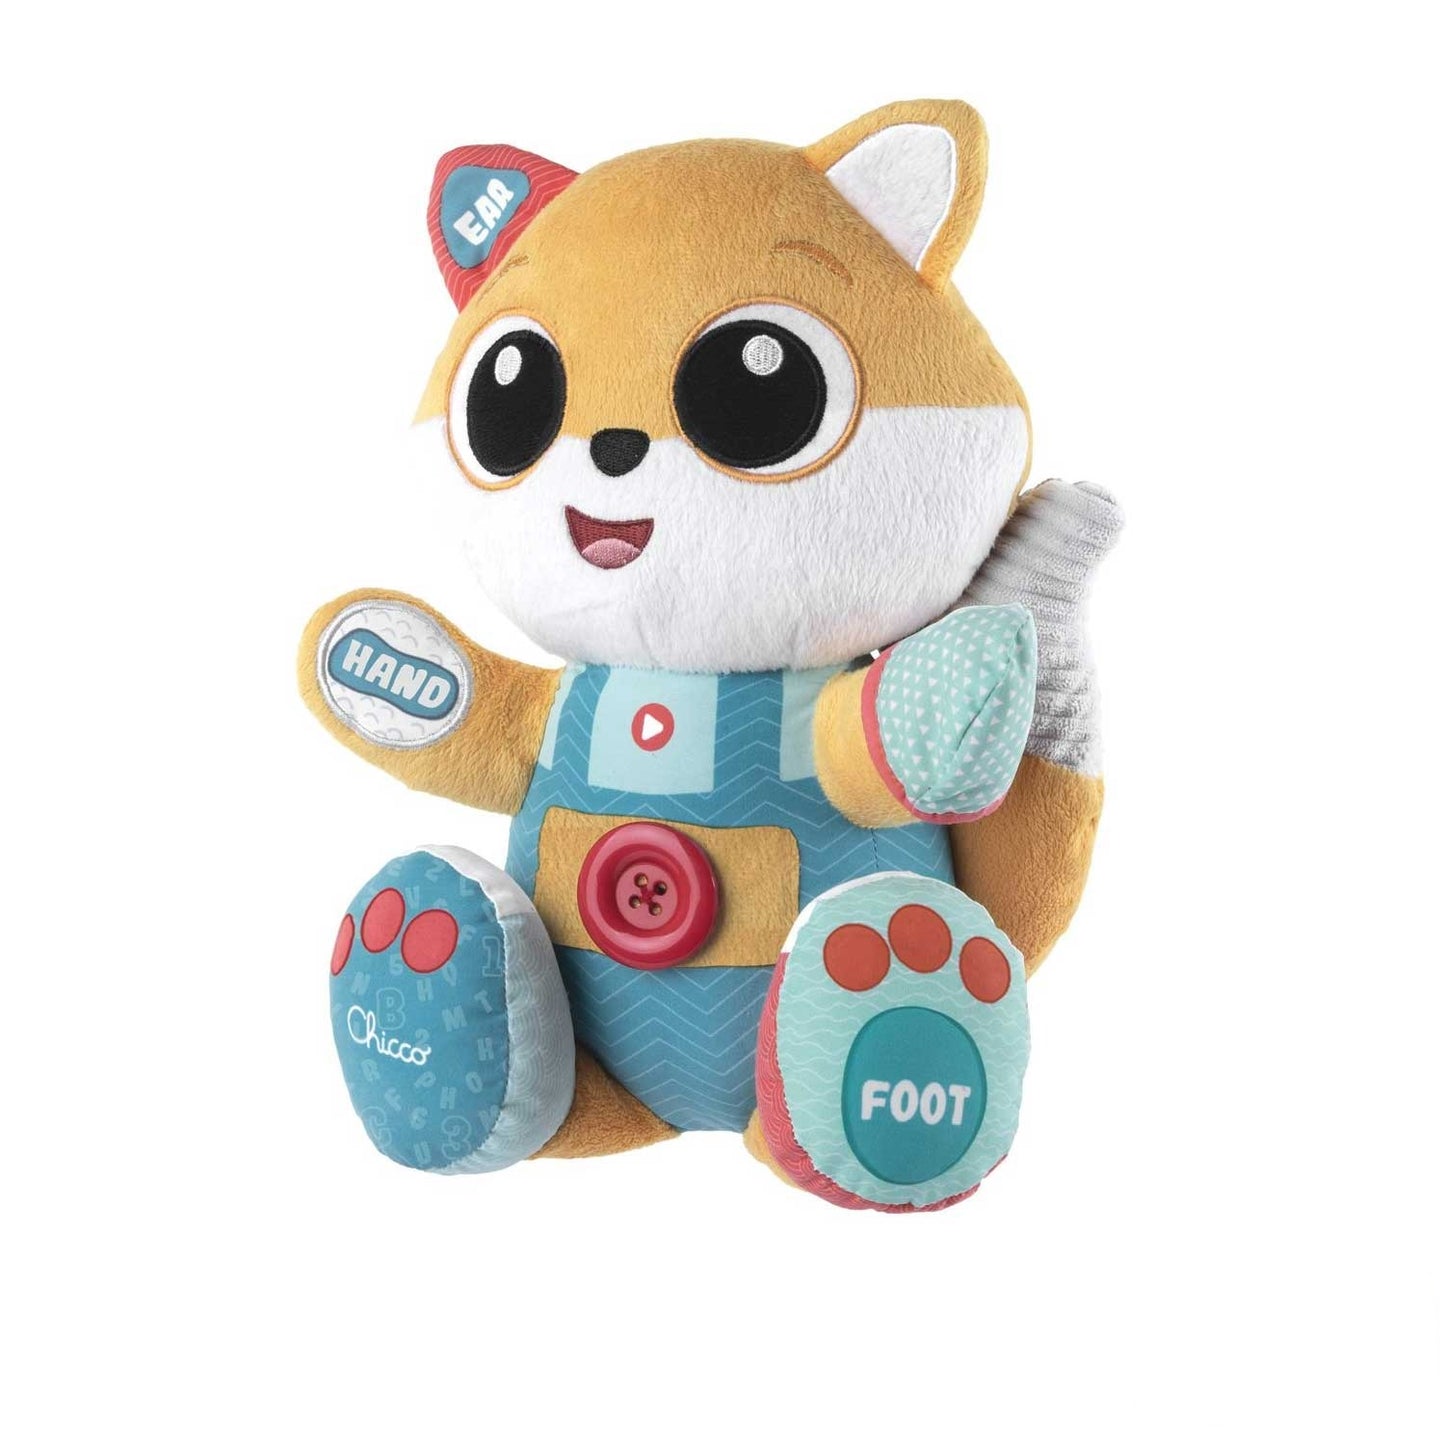 Chicco - Bilingual Interactive Soft Toy ABC Foxy the Fox Learns English